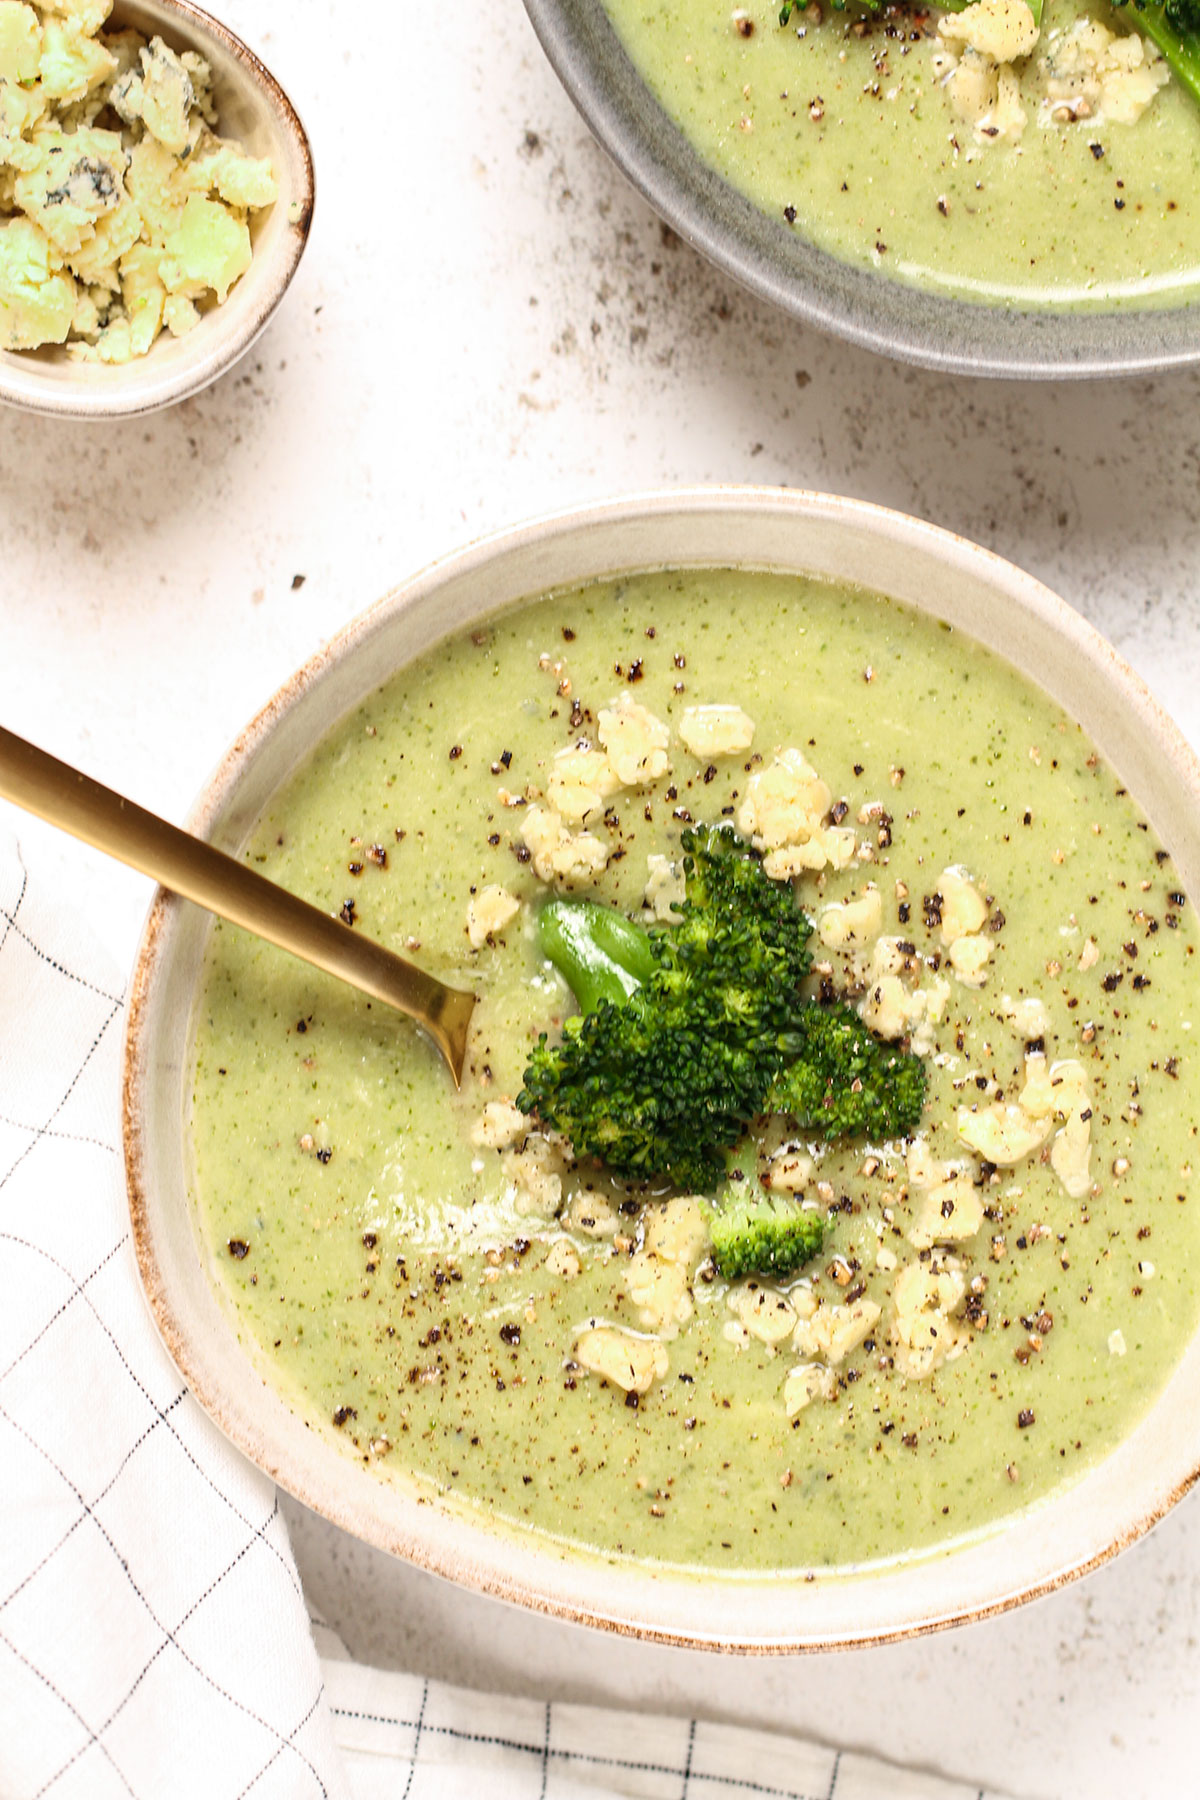 Two bowls of broccoli and stilton soup topped with crumbled stilton.